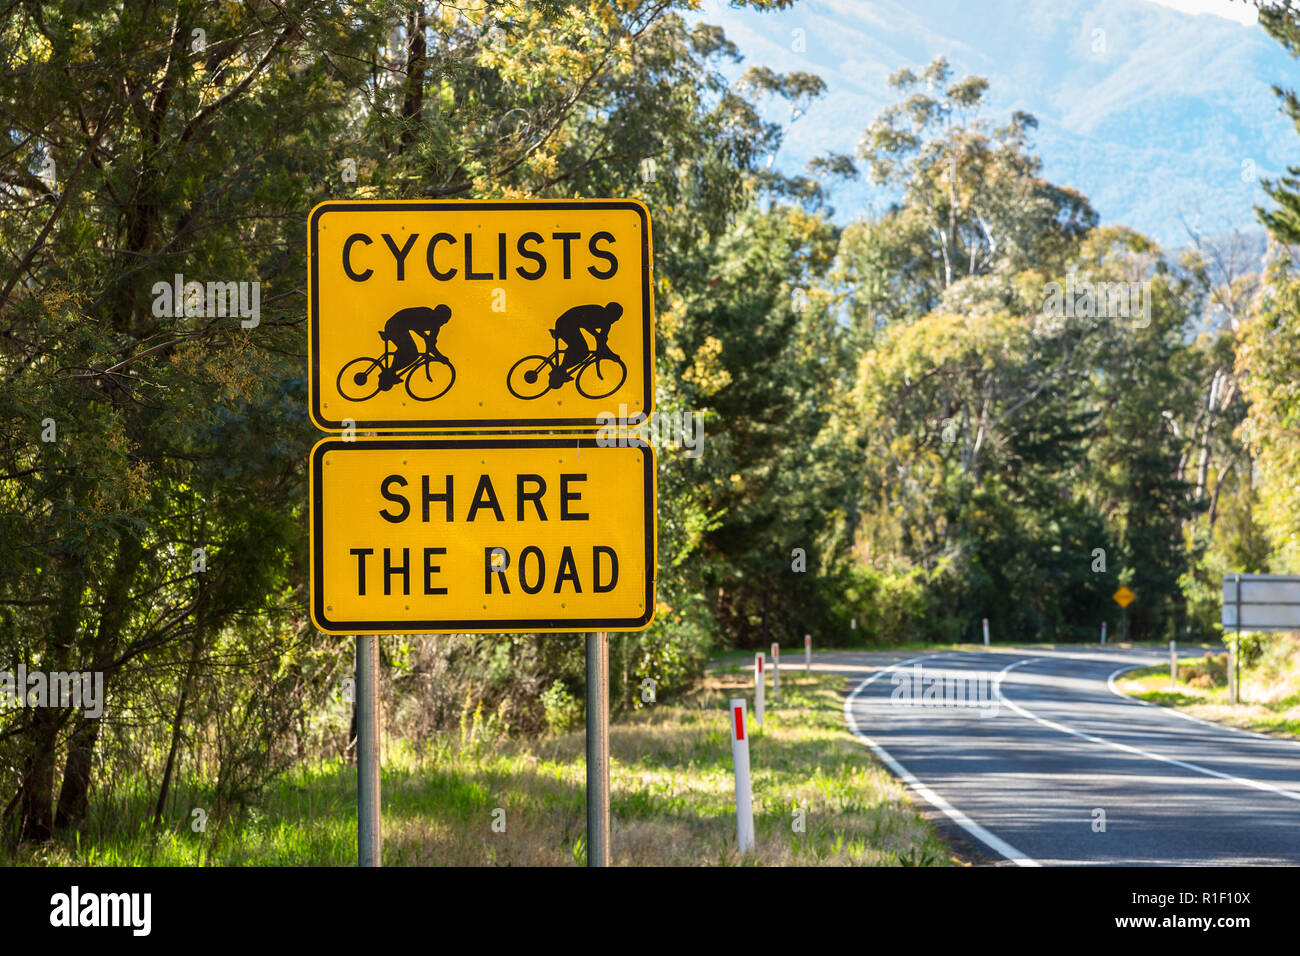 Cyclists Share the Road Sign Australia Stock Photo